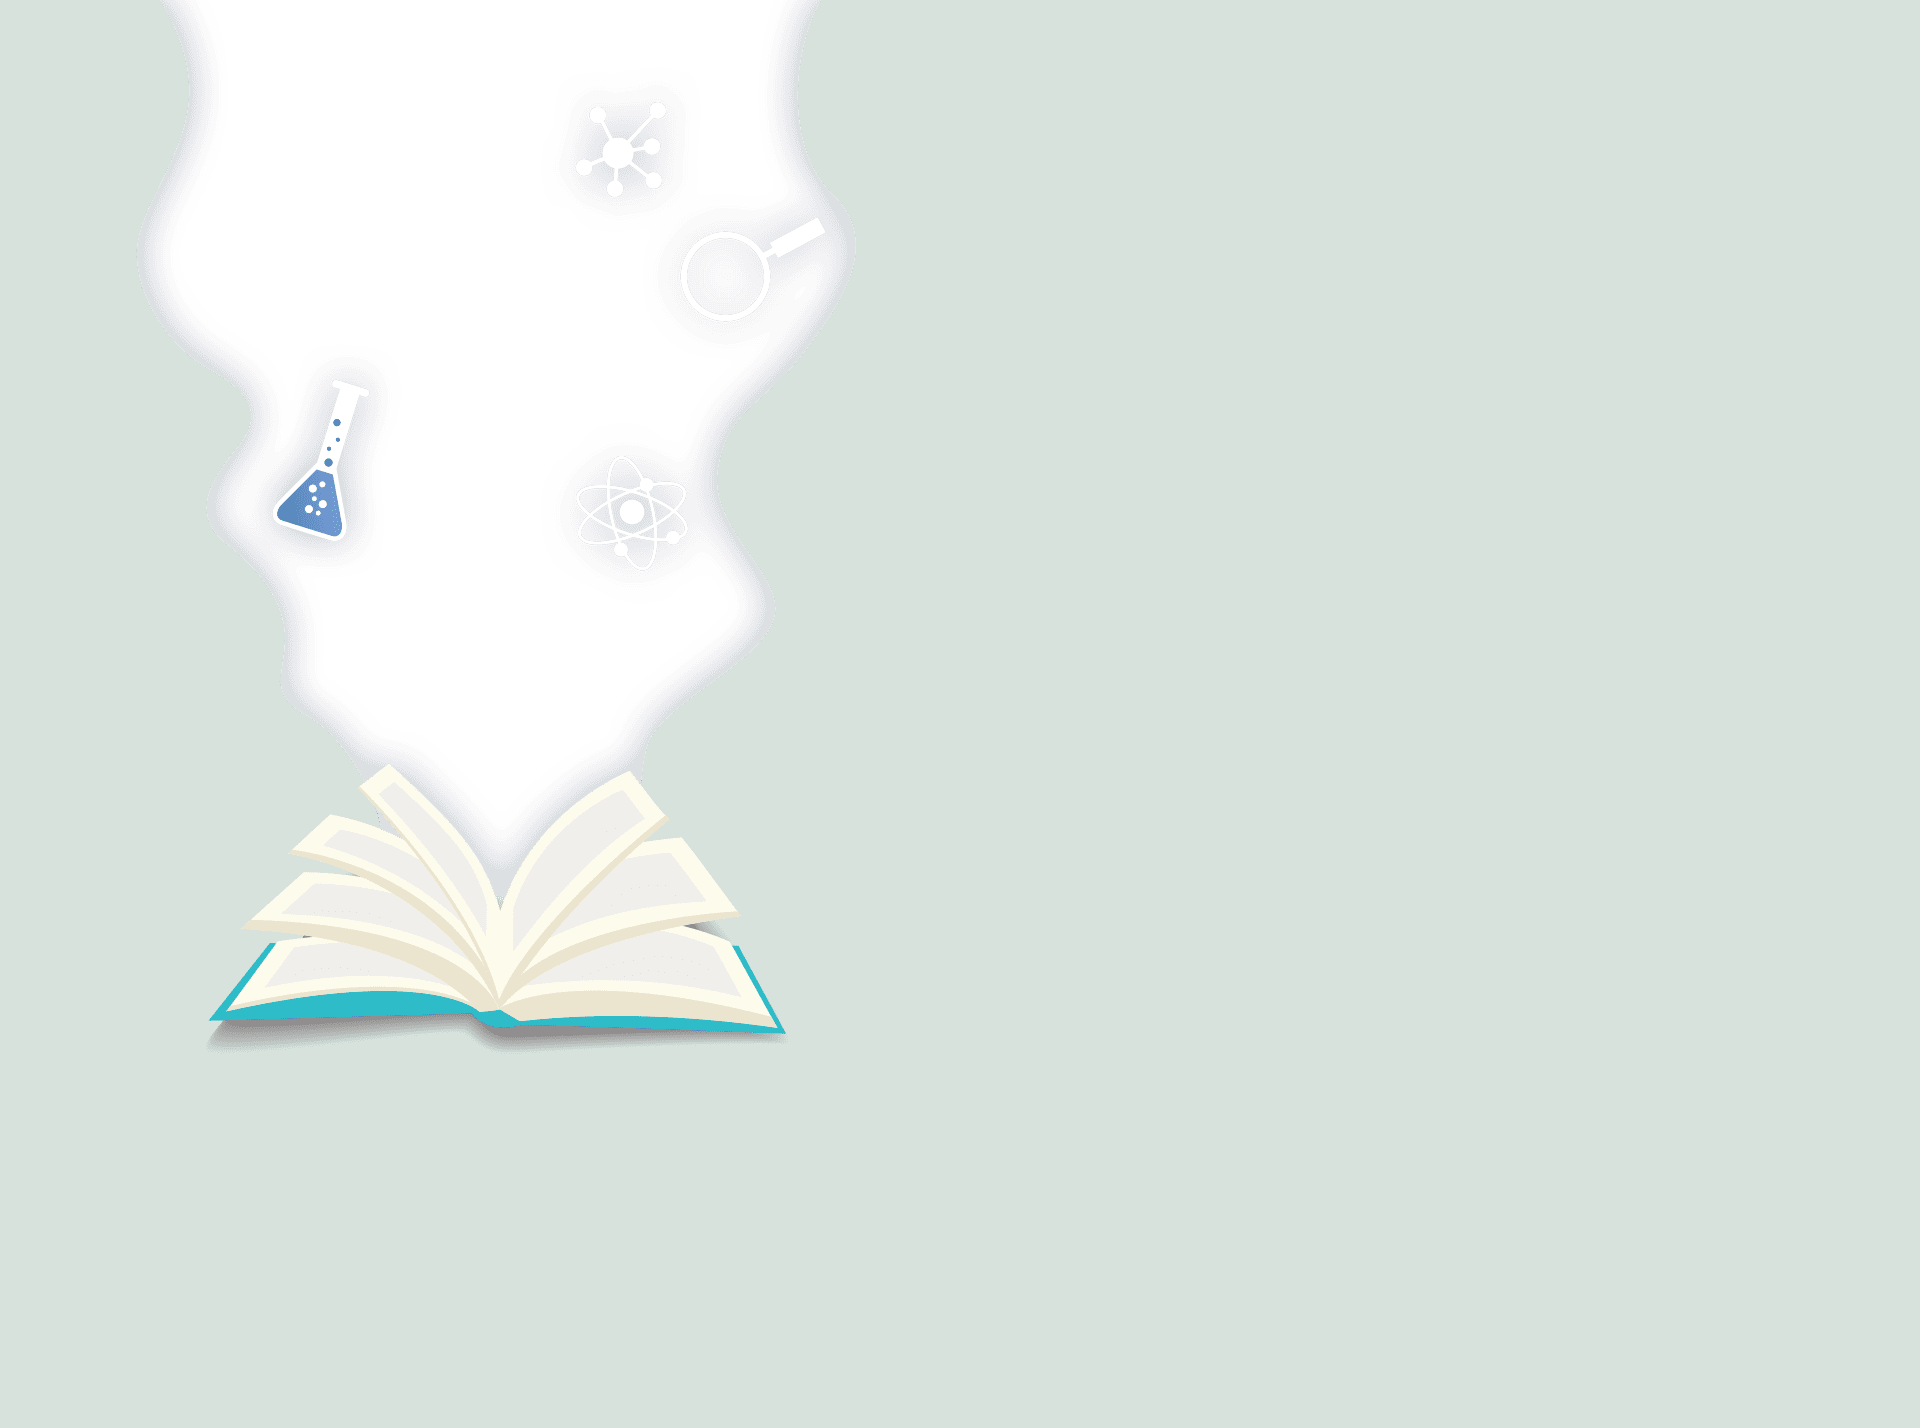 Book with science symbols cutout